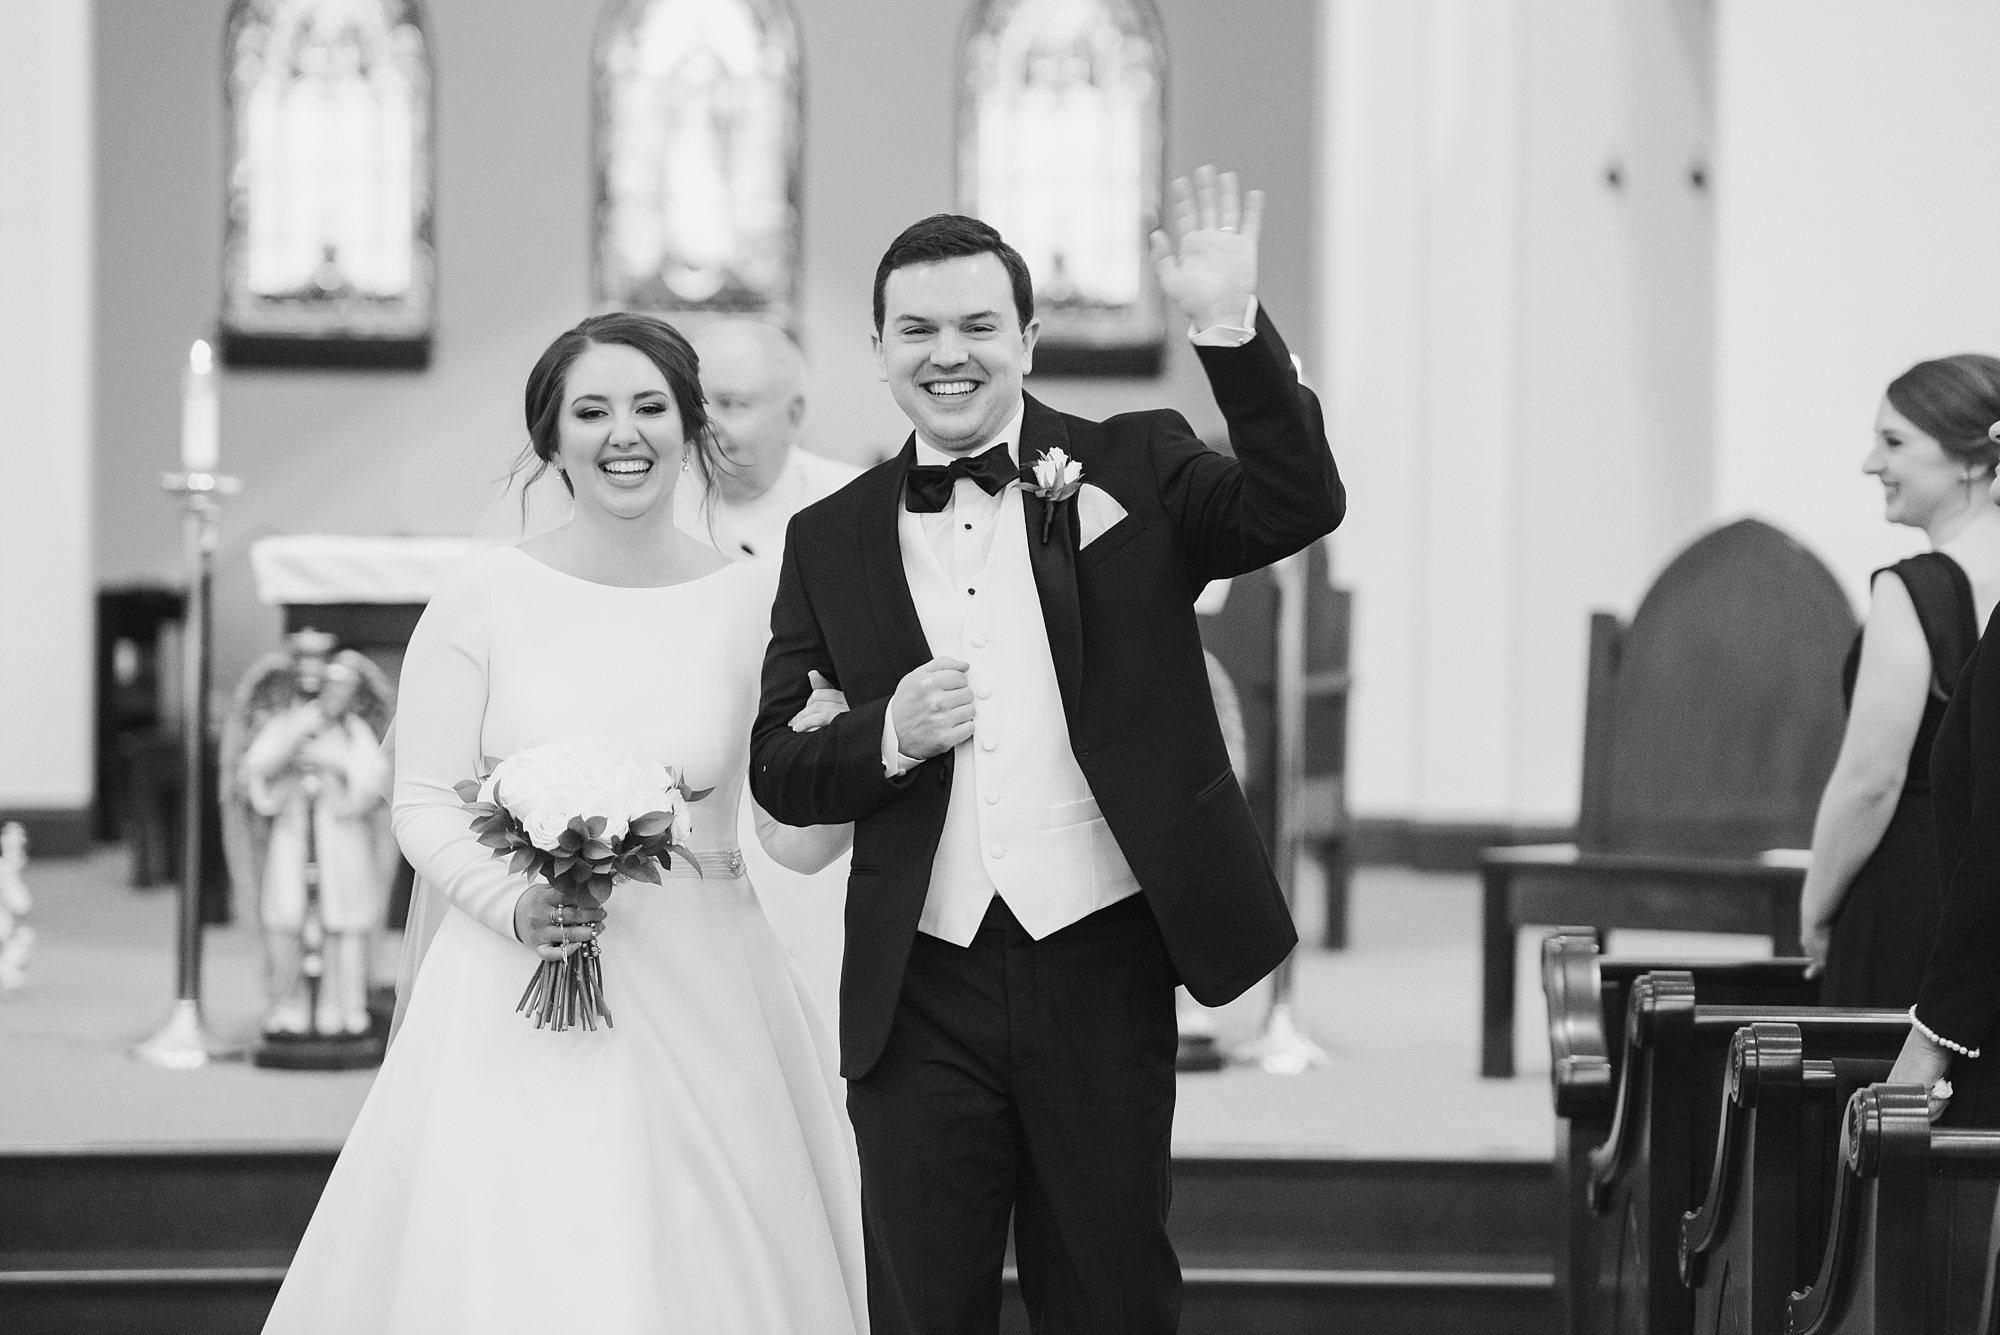 newlyweds walk up aisle after traditional church wedding in Ohio